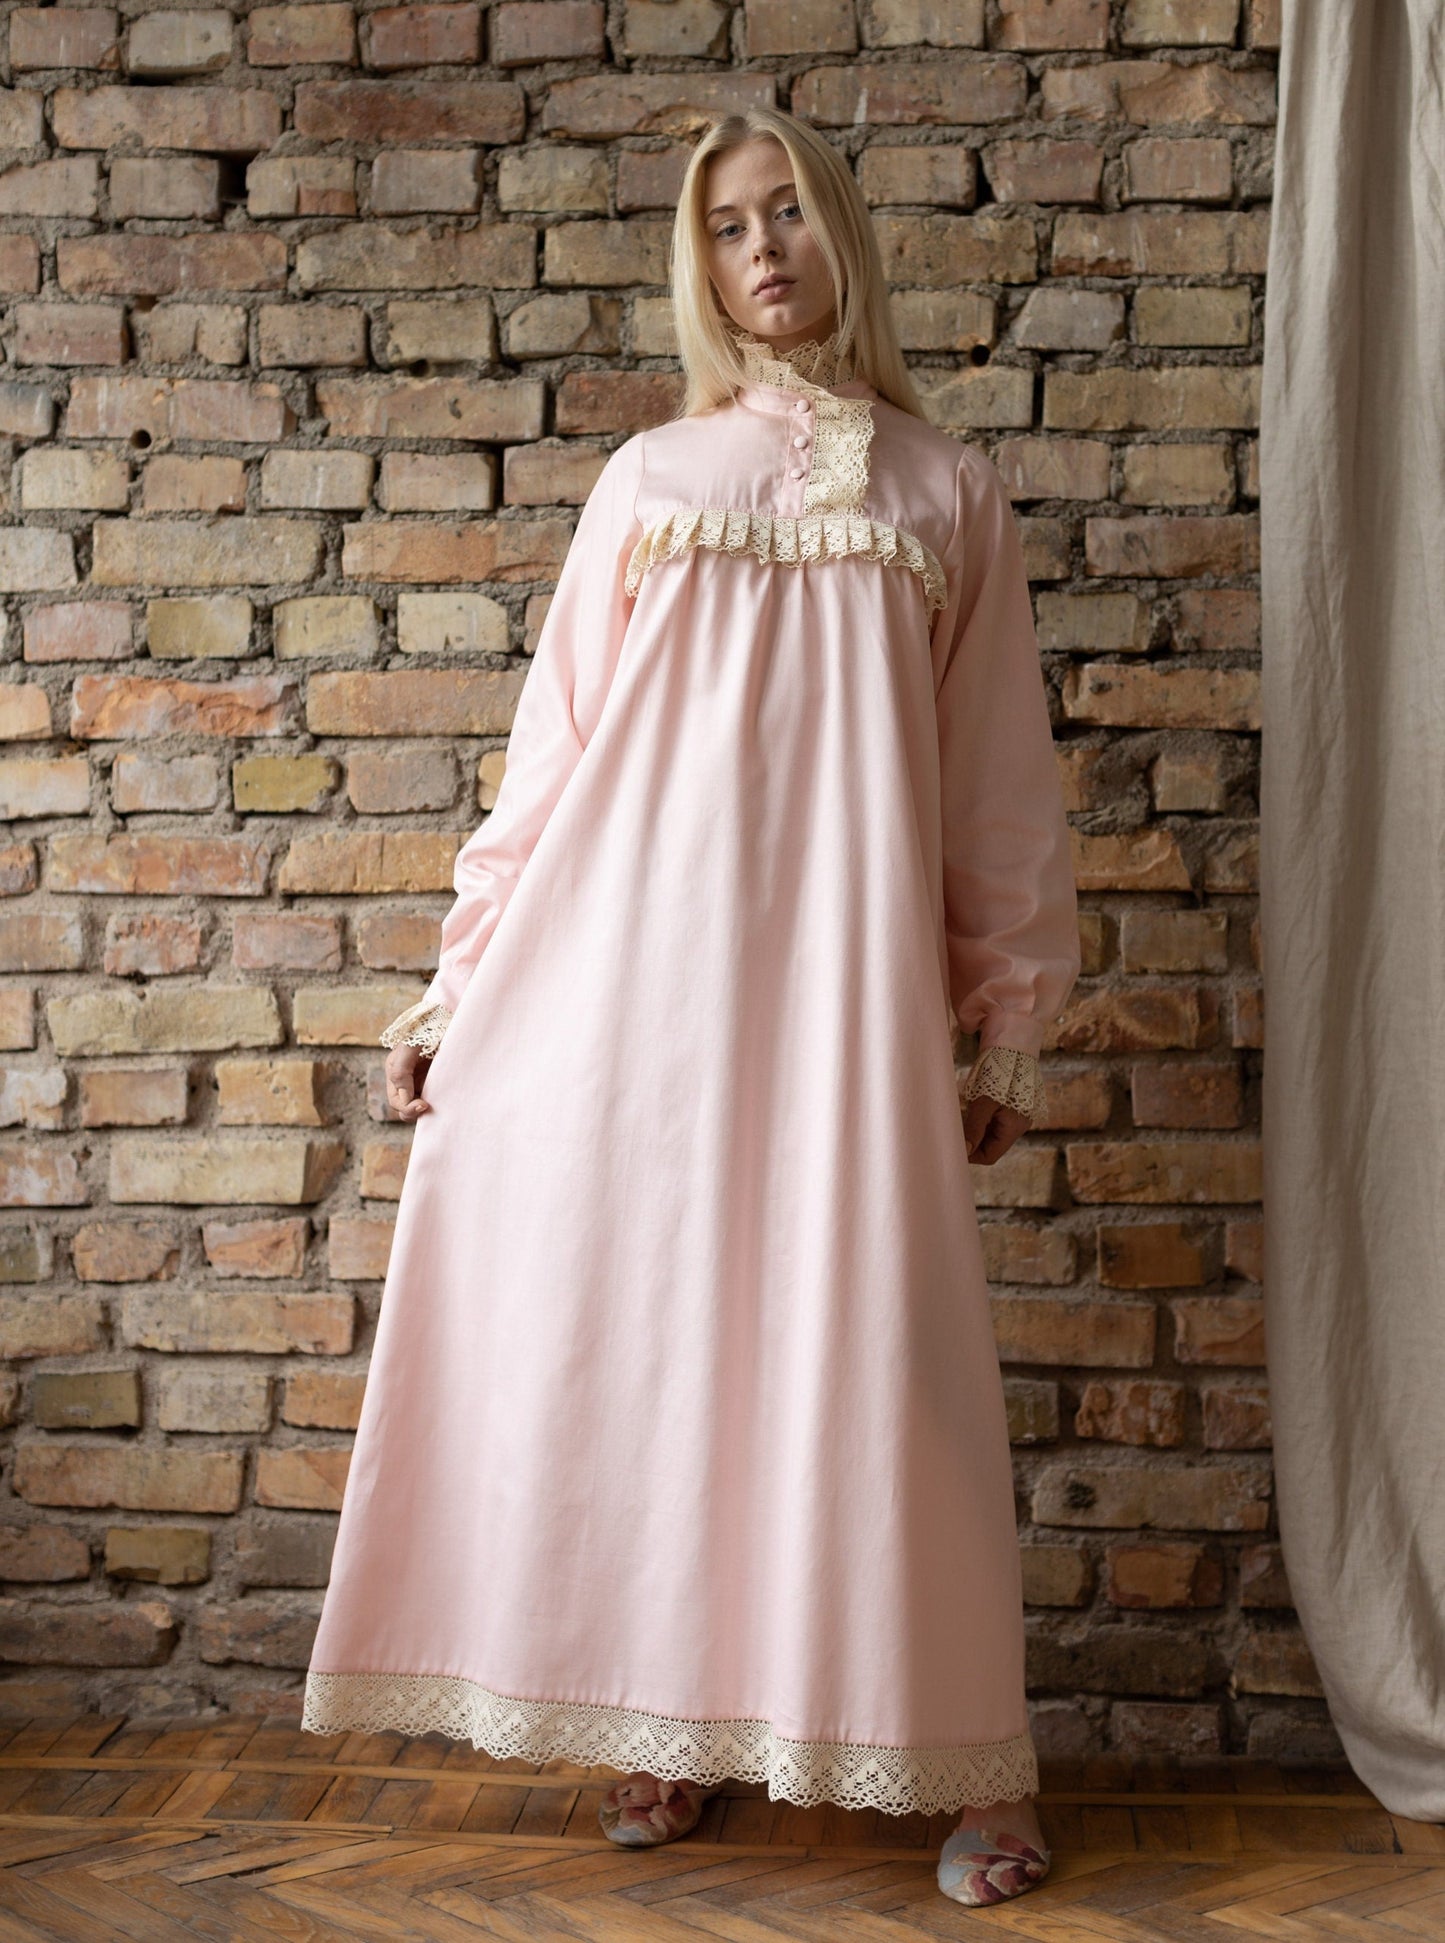 Victorian Winter Nightgown in Dusty Pink